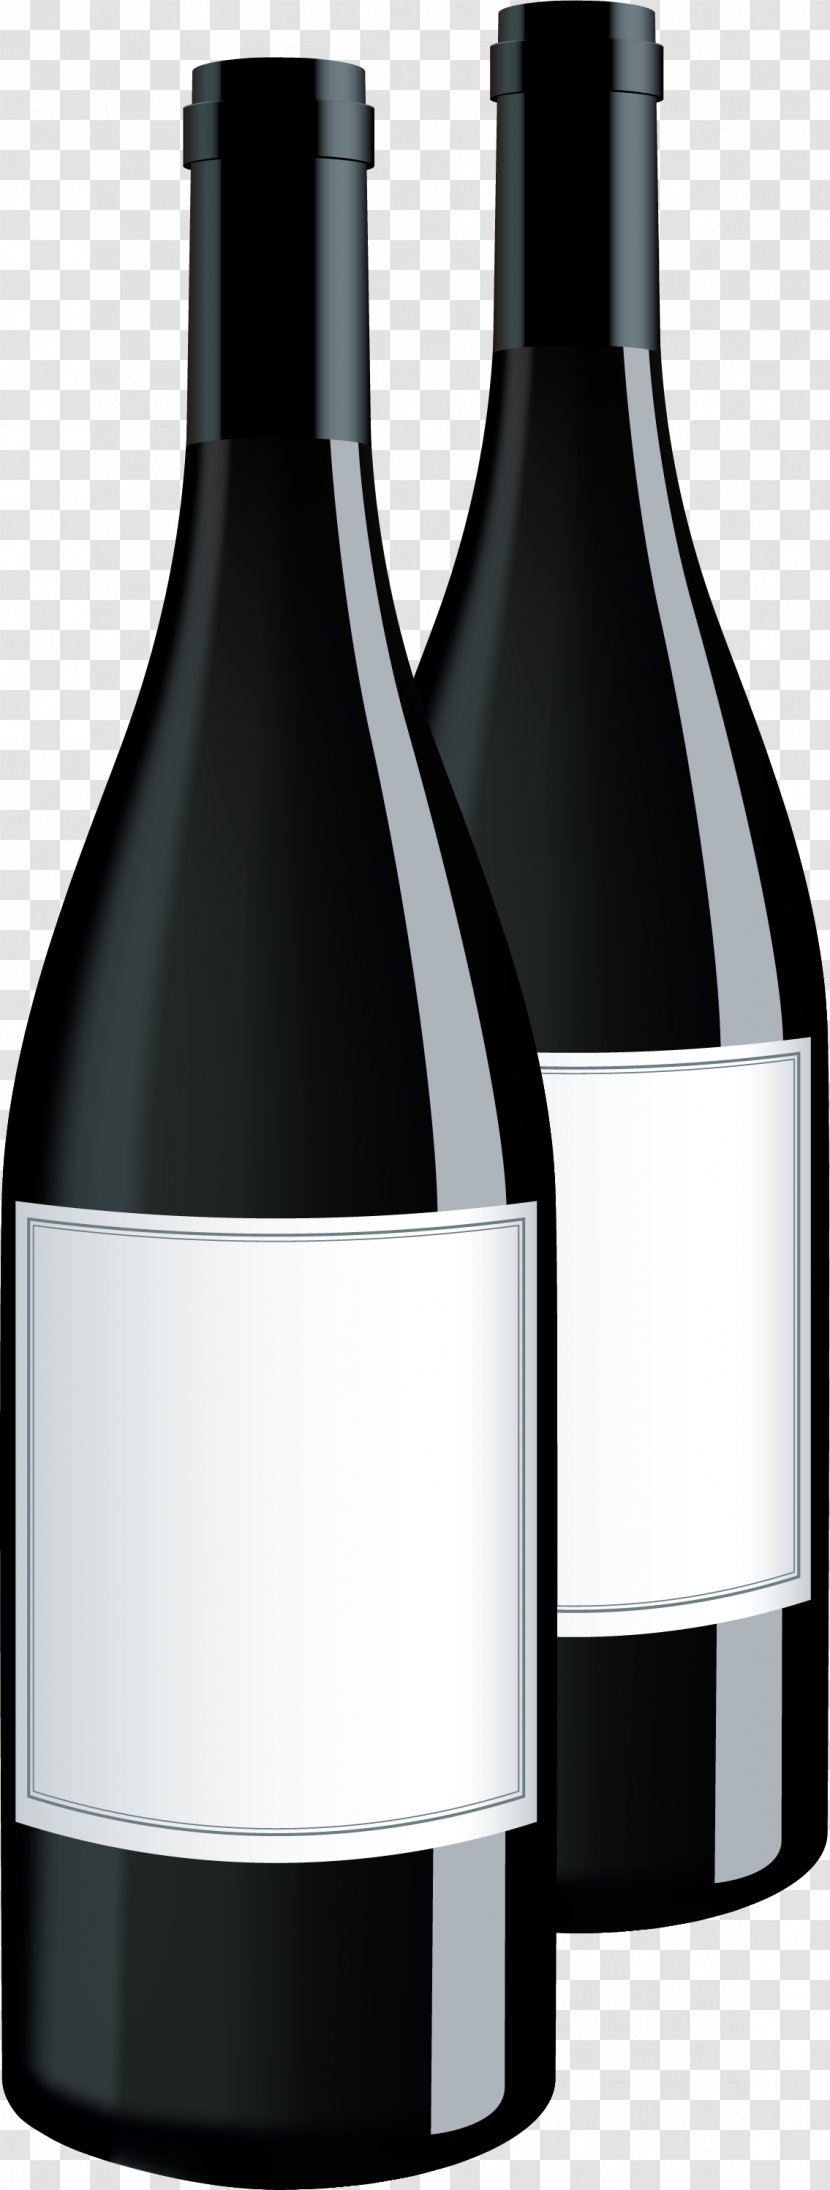 Red Wine Rosxe9 Terratico Di Bibbona Bottle - Two Bottles Of Transparent PNG